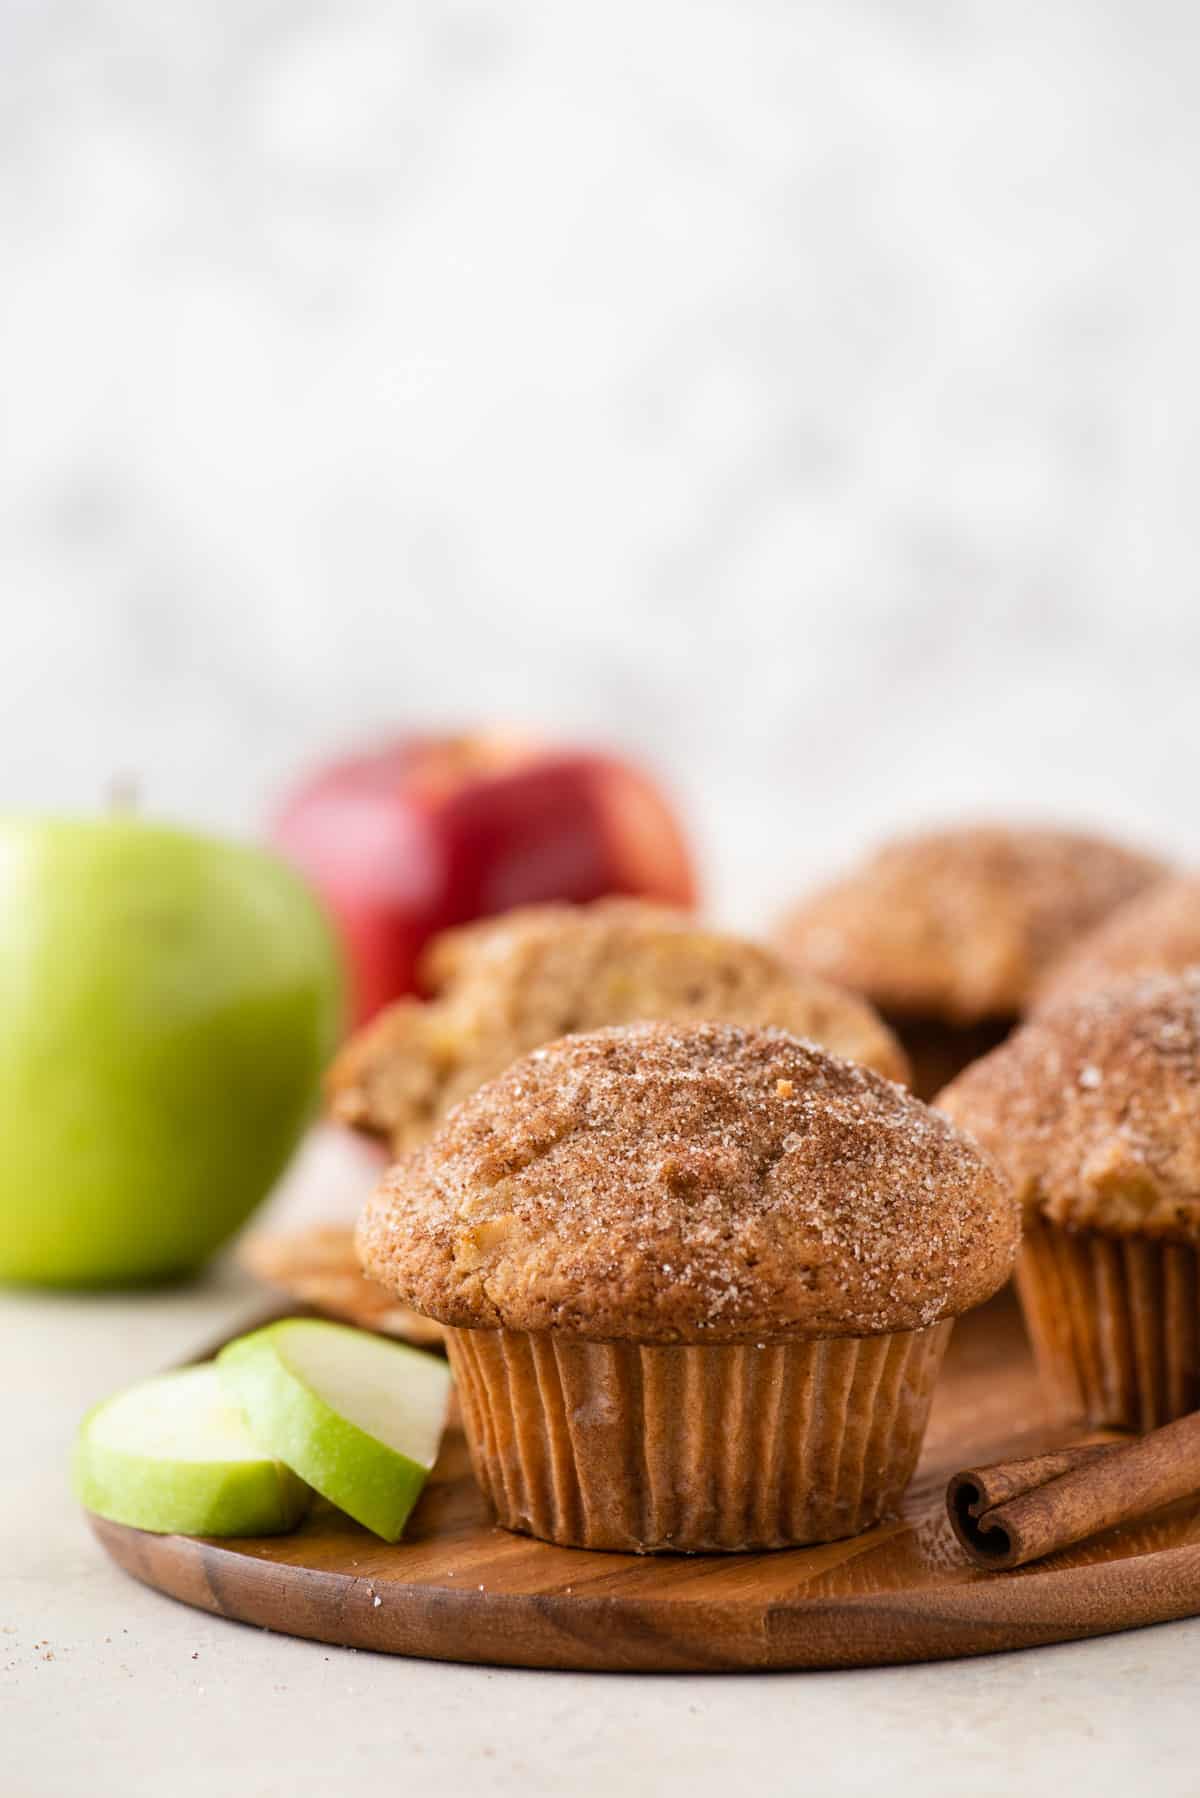 apple cinnamon muffins on a wood platter surrounded by a cinnamon stick, green apple slices, and more apples and muffins in the background